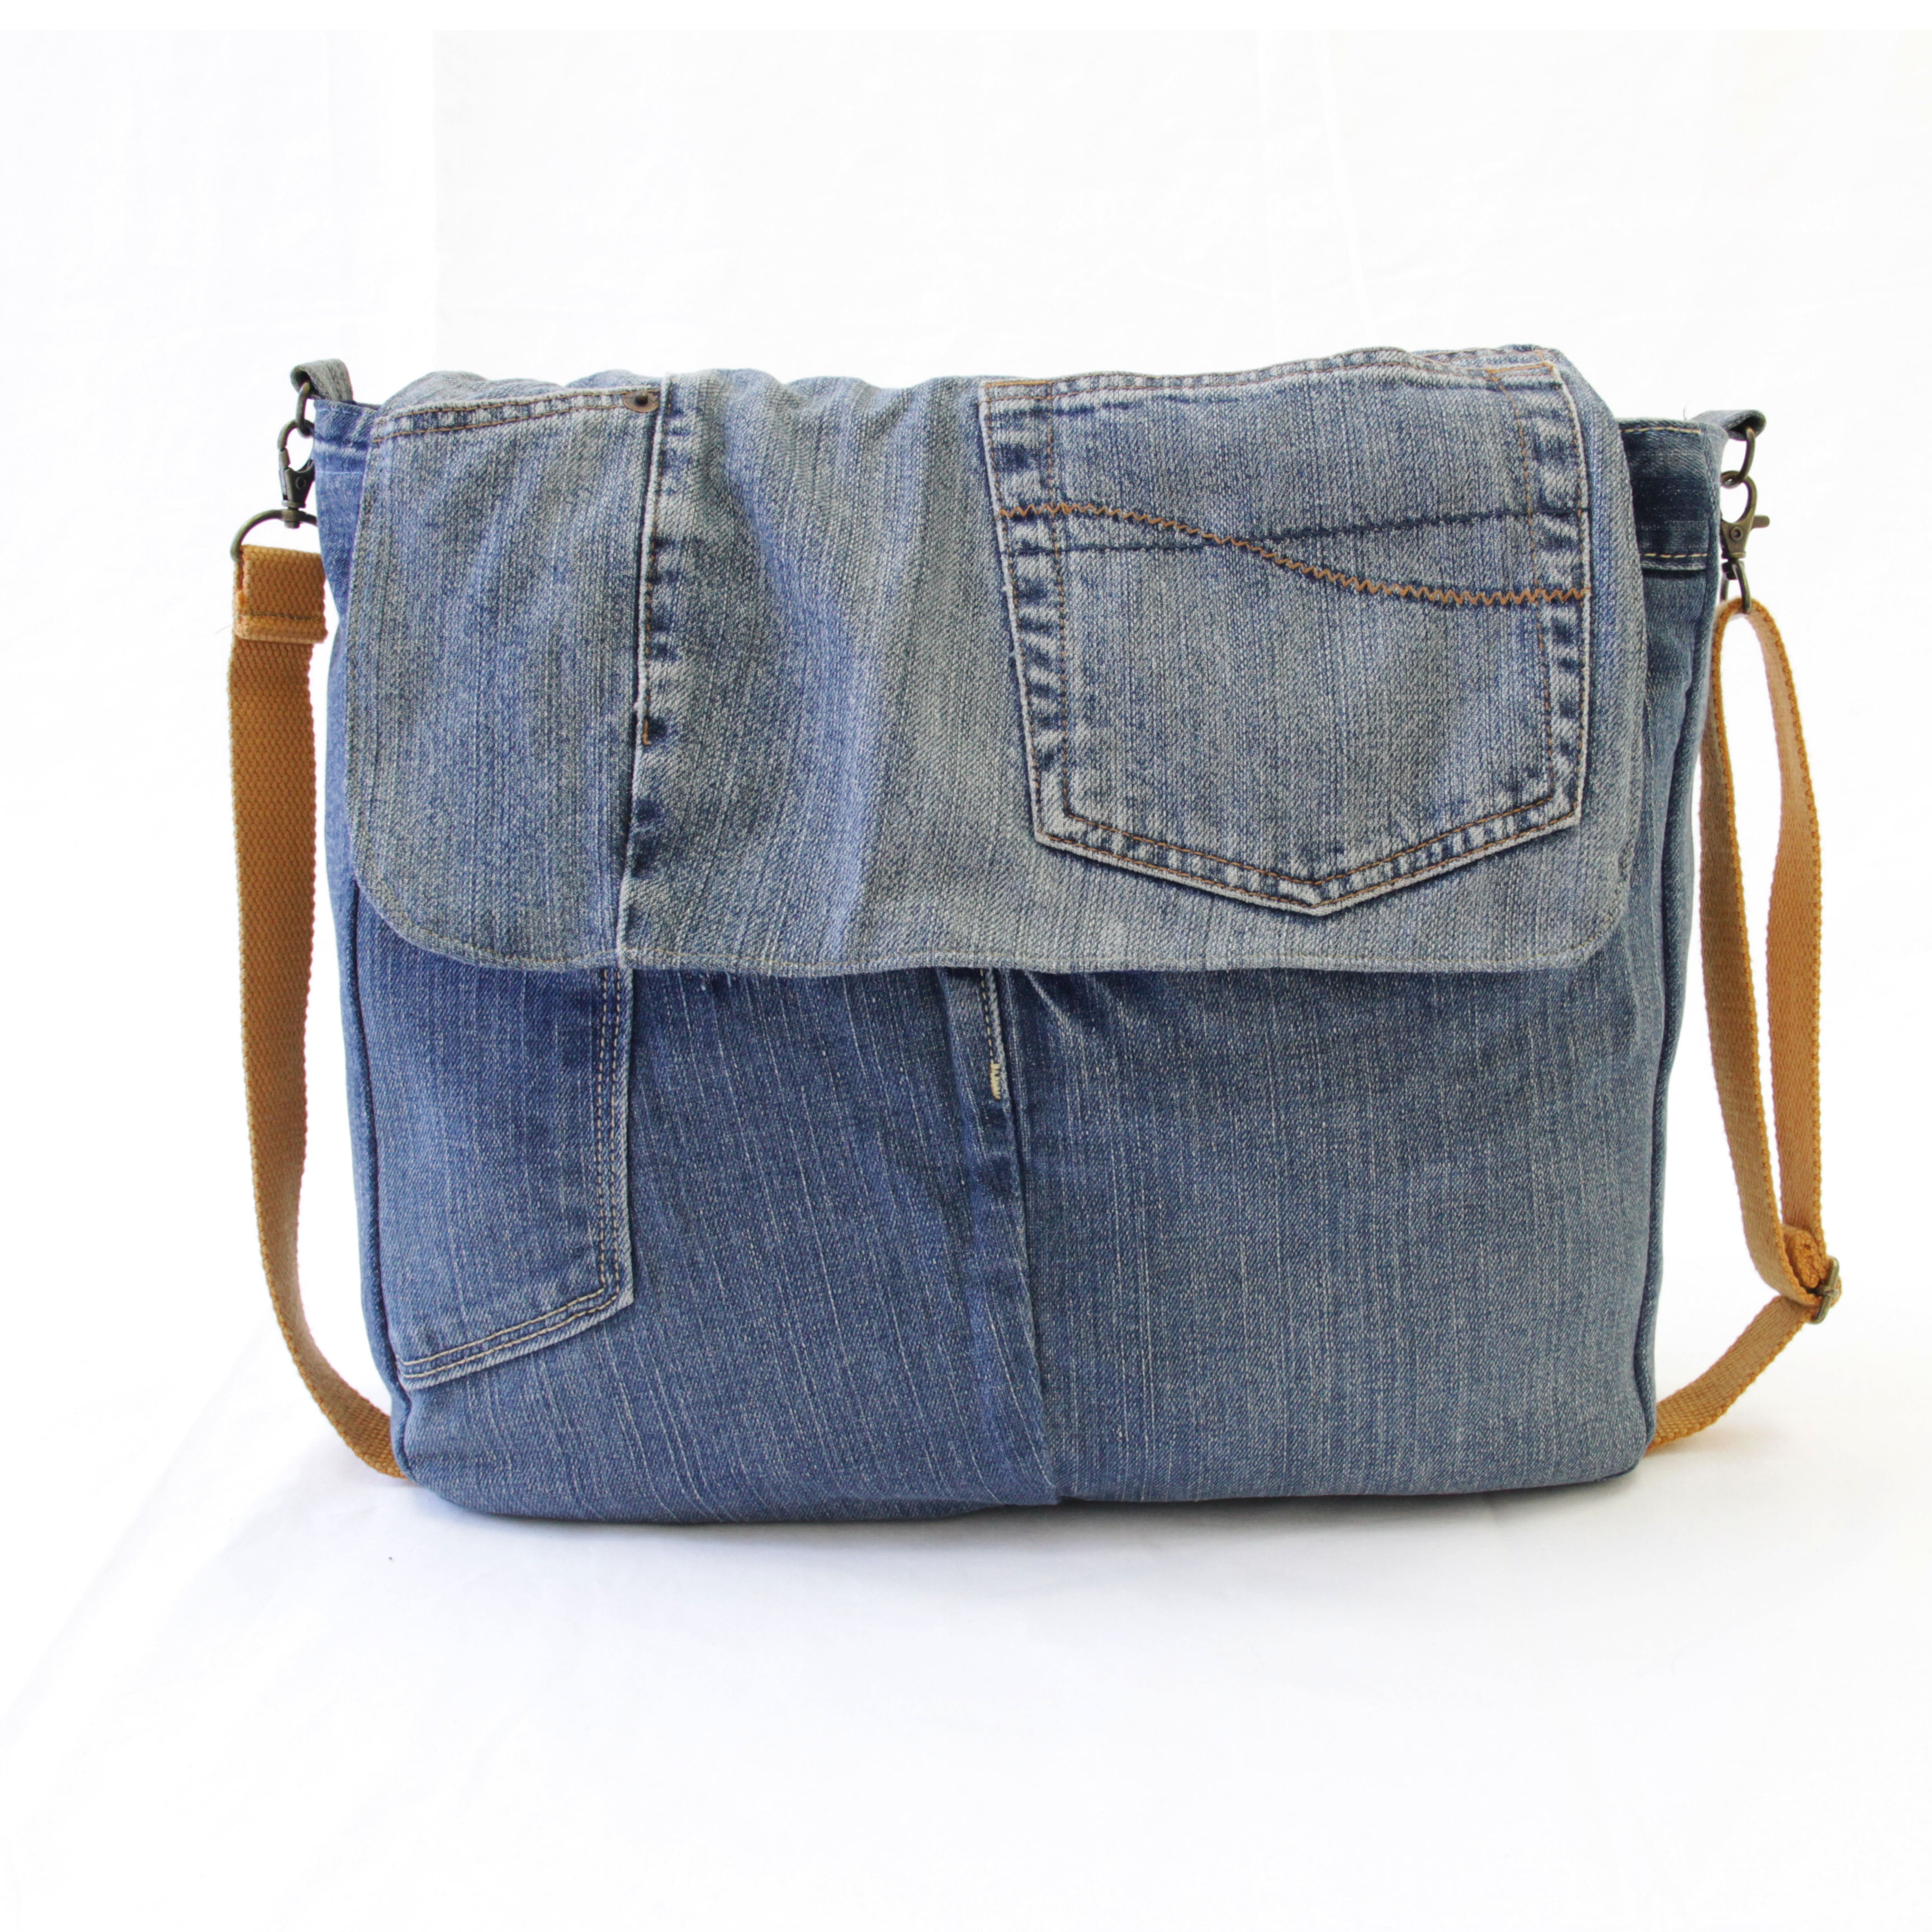 Upcycled Denim Bag – Sewing World Gallery